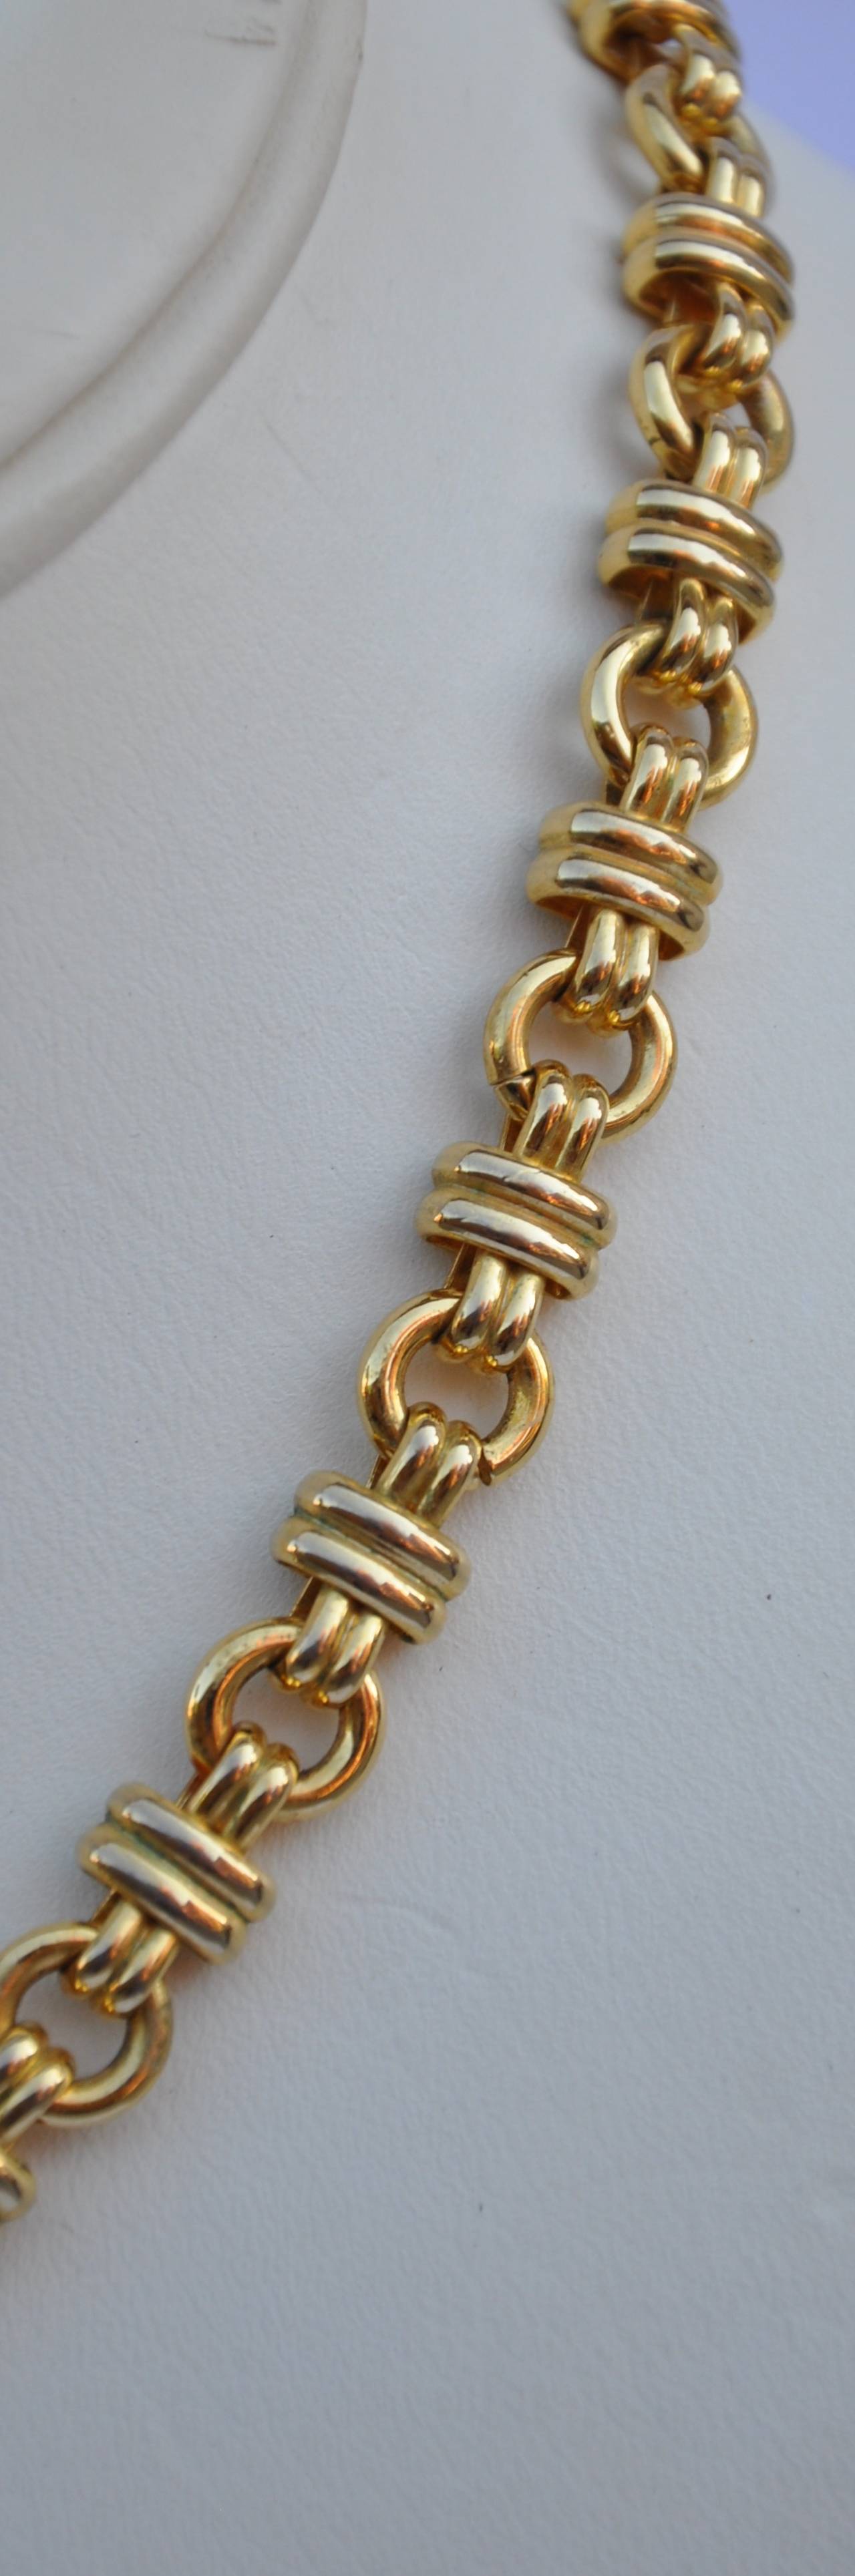 Elegant gilded gold hardware with vermeil-finish necklace measures 17", width is 5/16 and depth is 2/16"